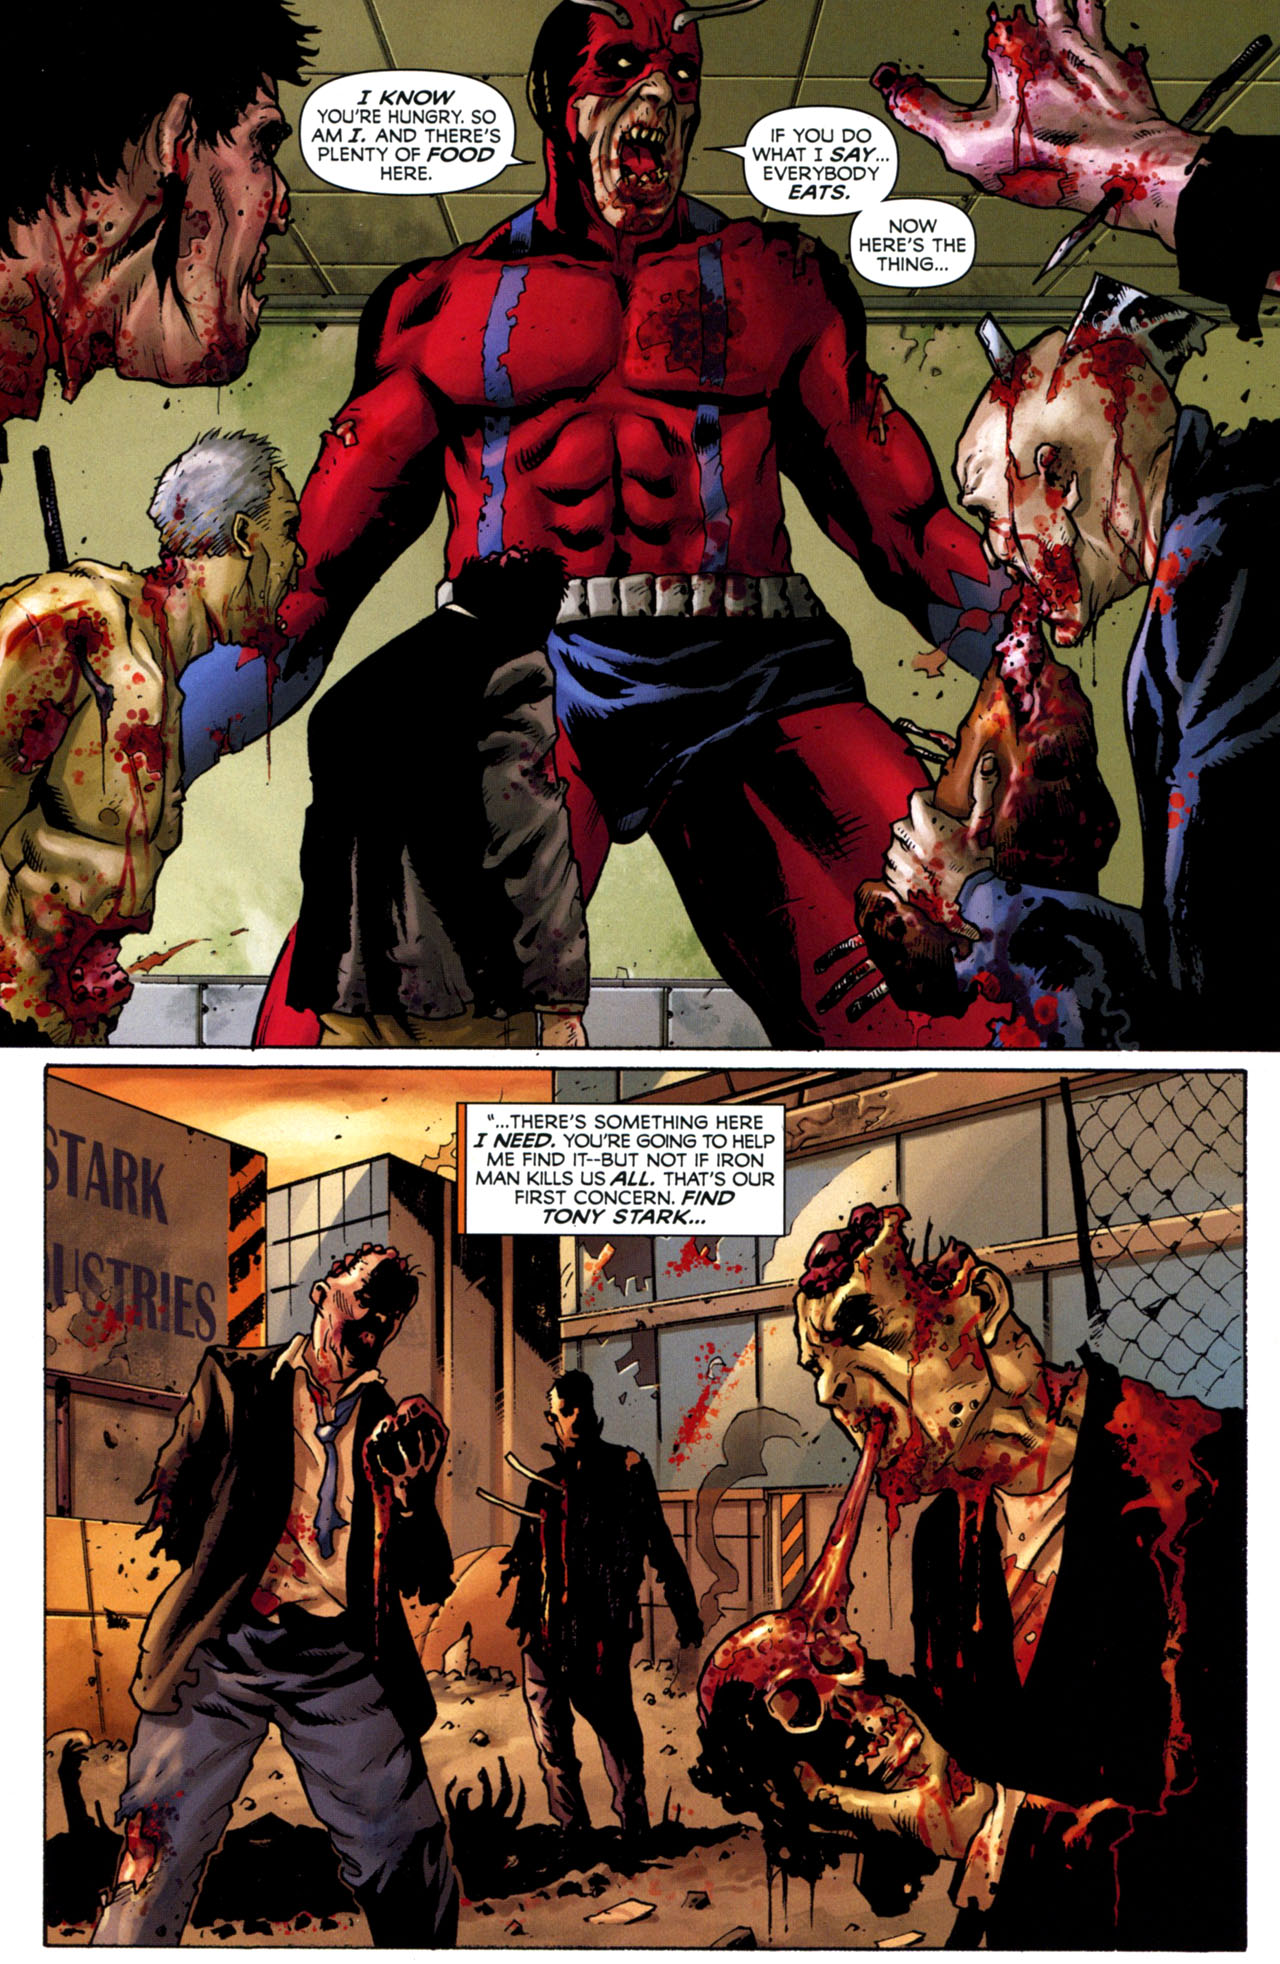 Marvel Zombies - The Return 02 of 05